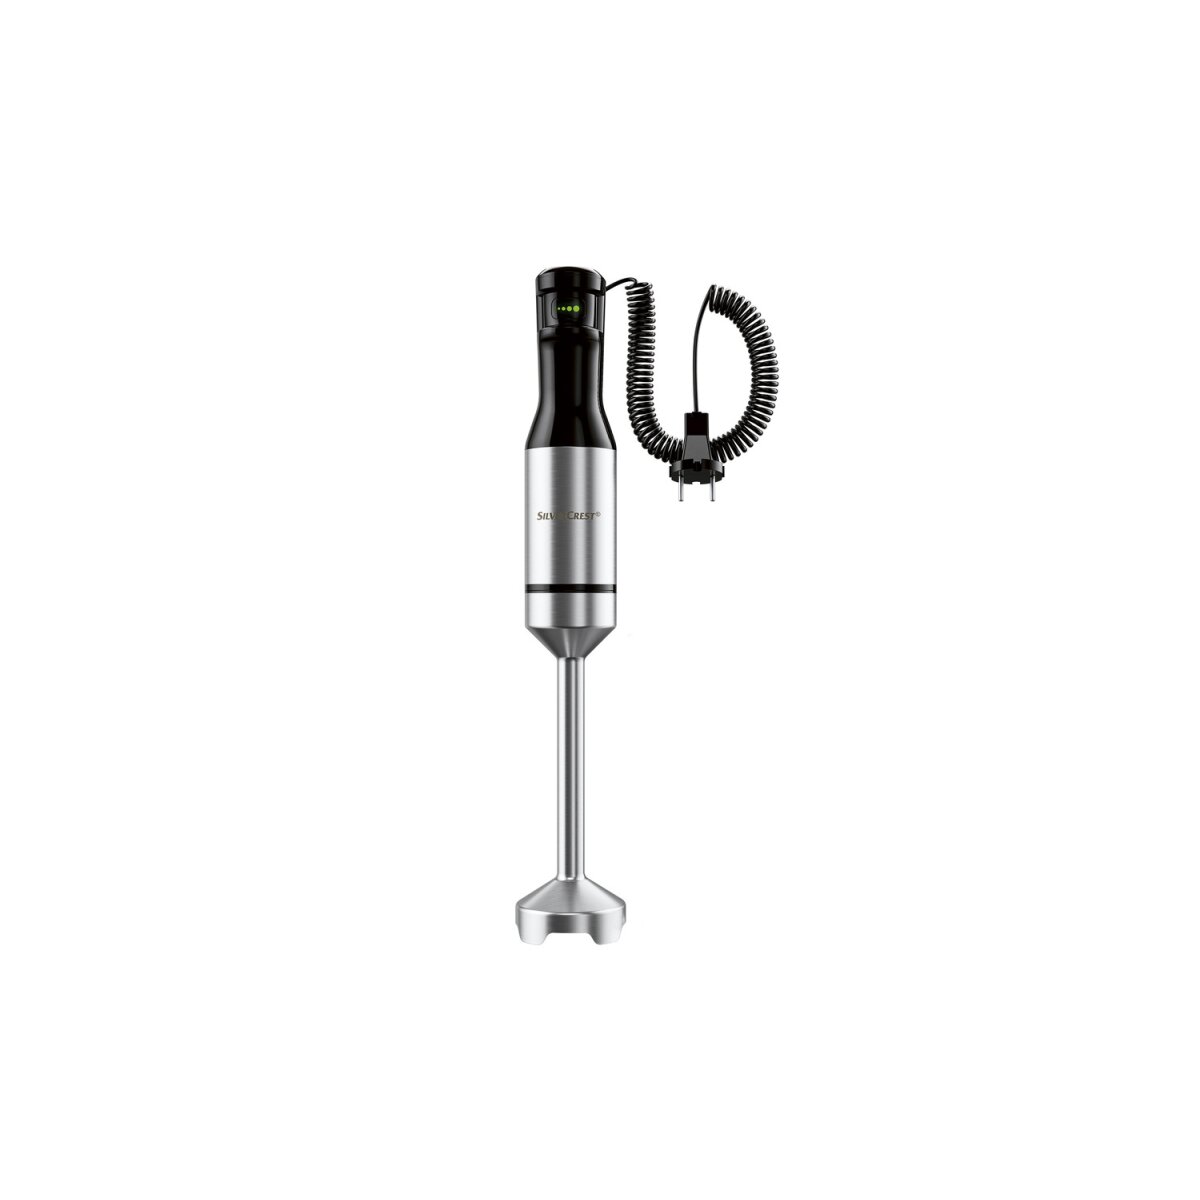 SILVERCREST® KITCHEN TOOLS Stabmixer SMSS 1000 A1, 1000 W - B-Ware sehr  gut, 19,99 €